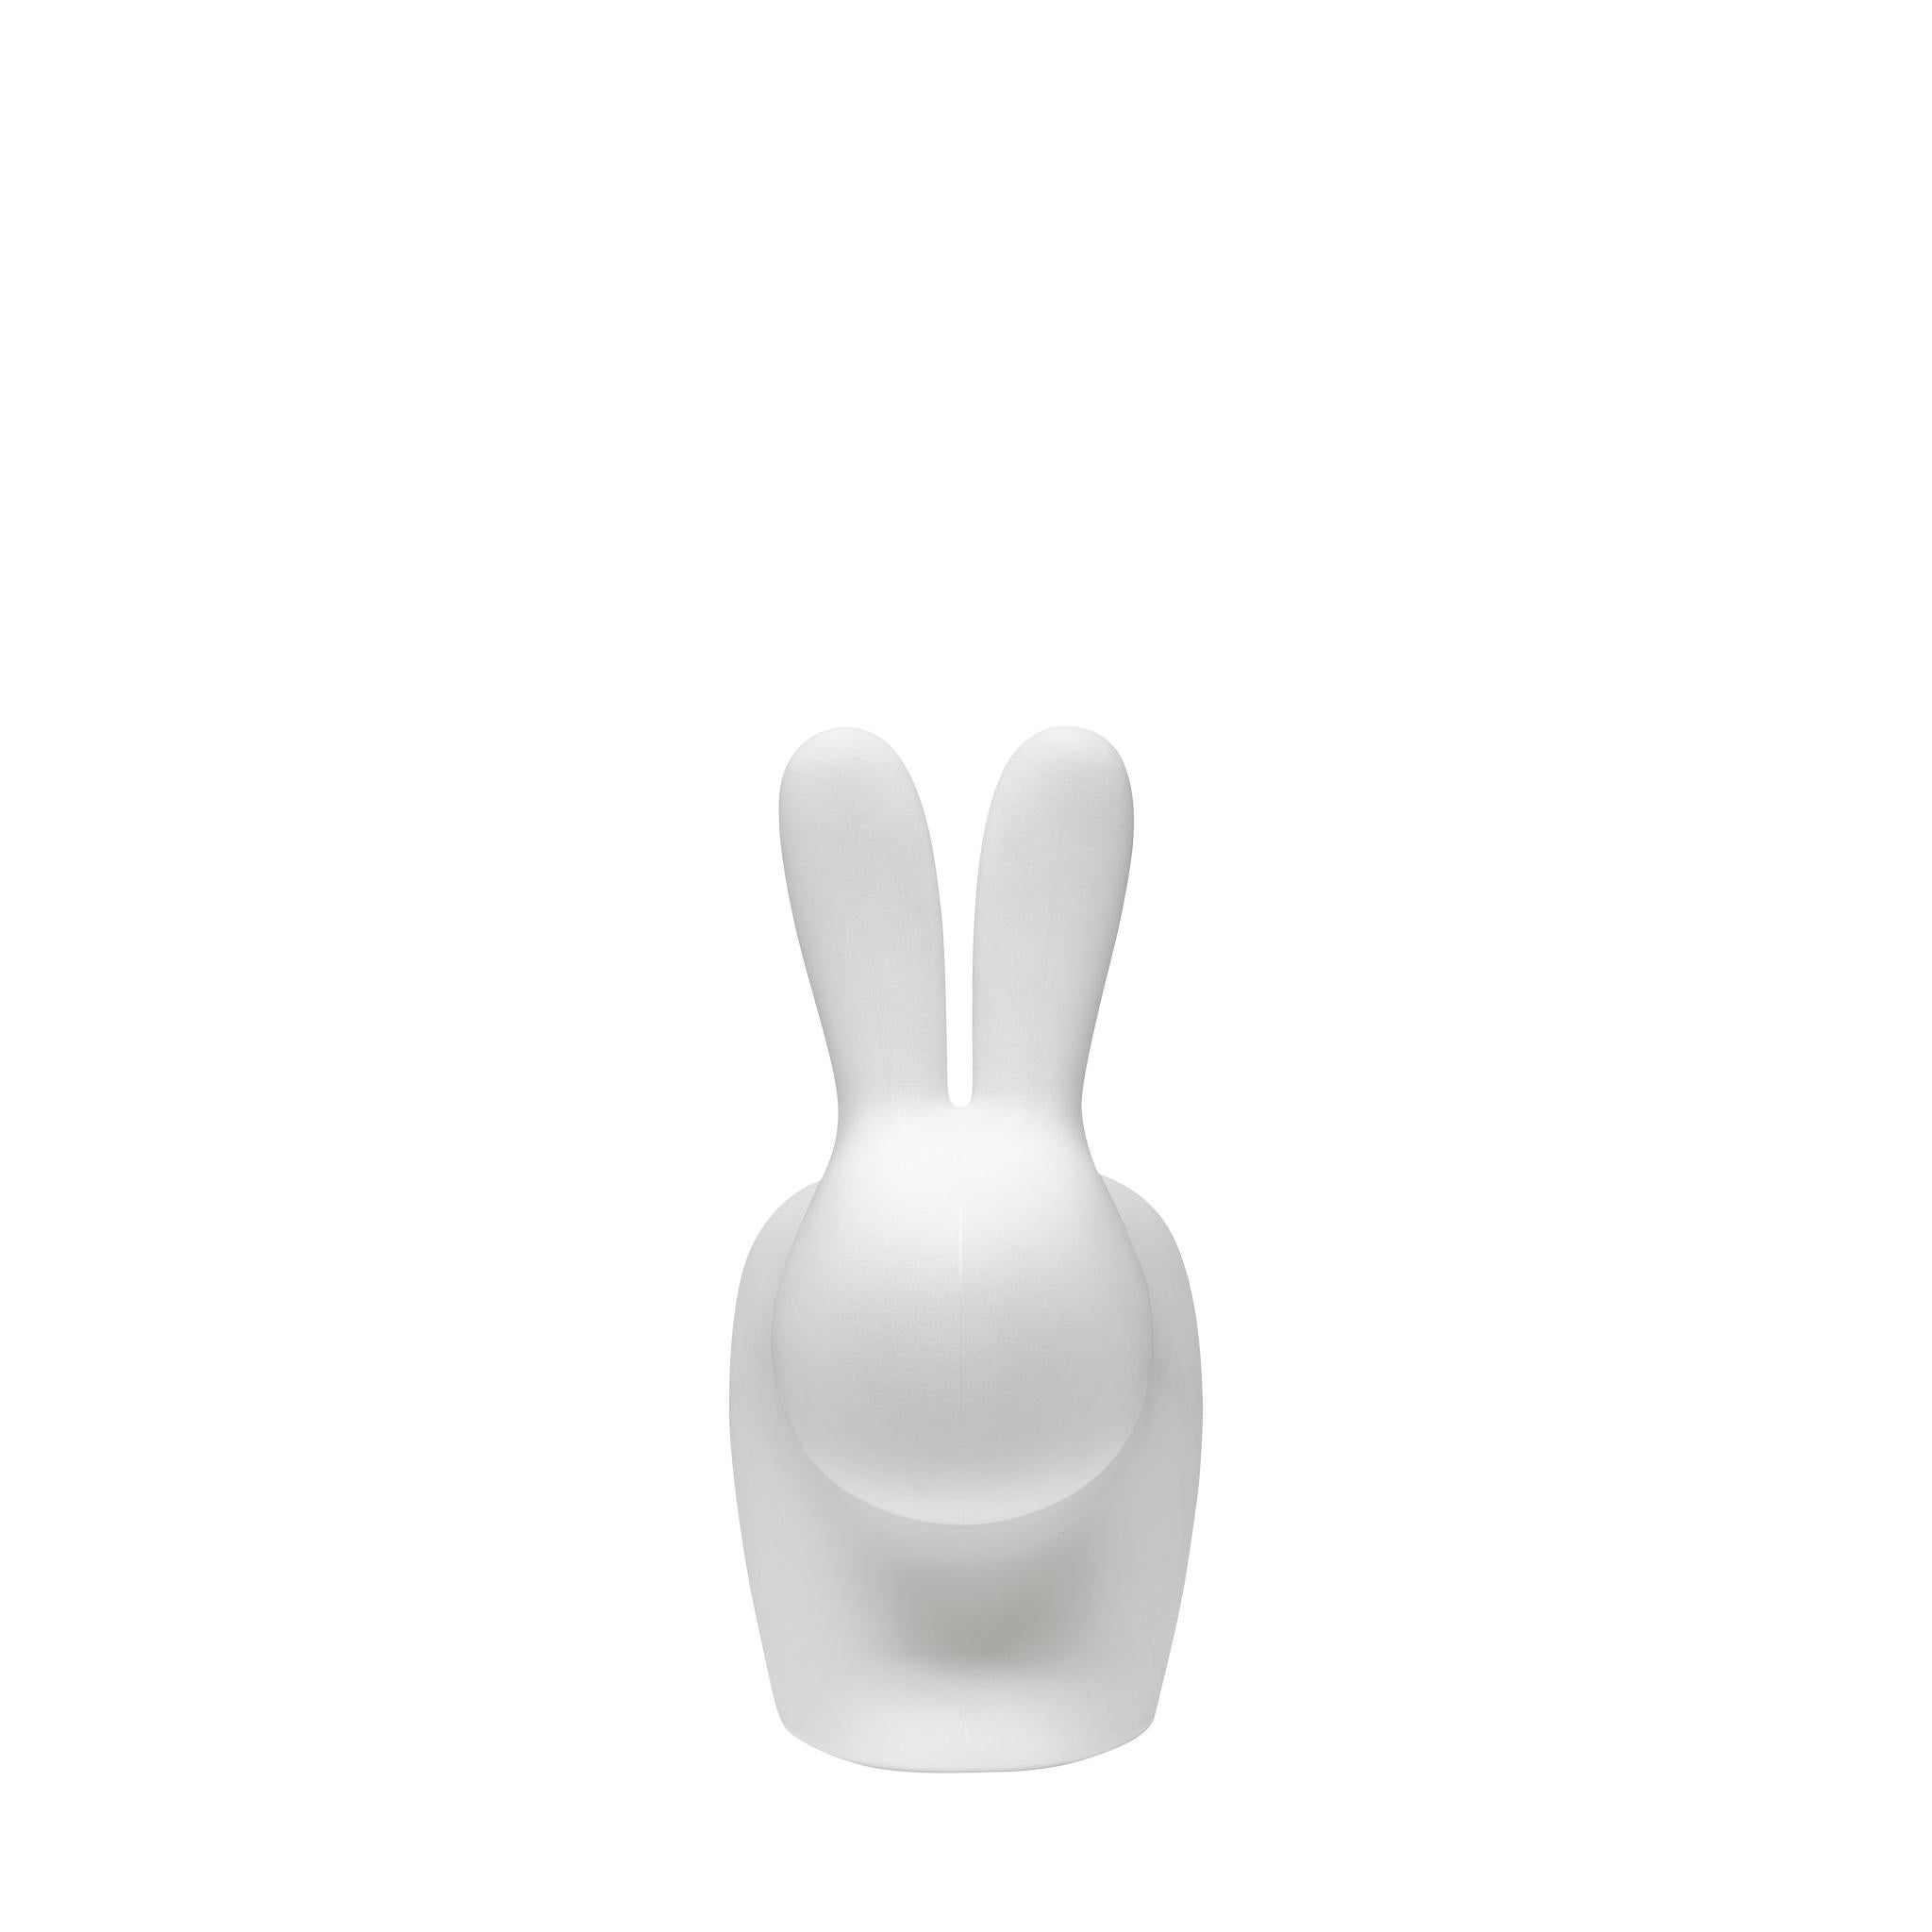 Rabbit chair goes bright! Designed by Stefano Giovanonni and immediately become a pop icon, it can both be used as a light source and a chair. Sit by leaning against the ears or ride it and rest your forearms on its ears. The most authentic Qeeboo’s